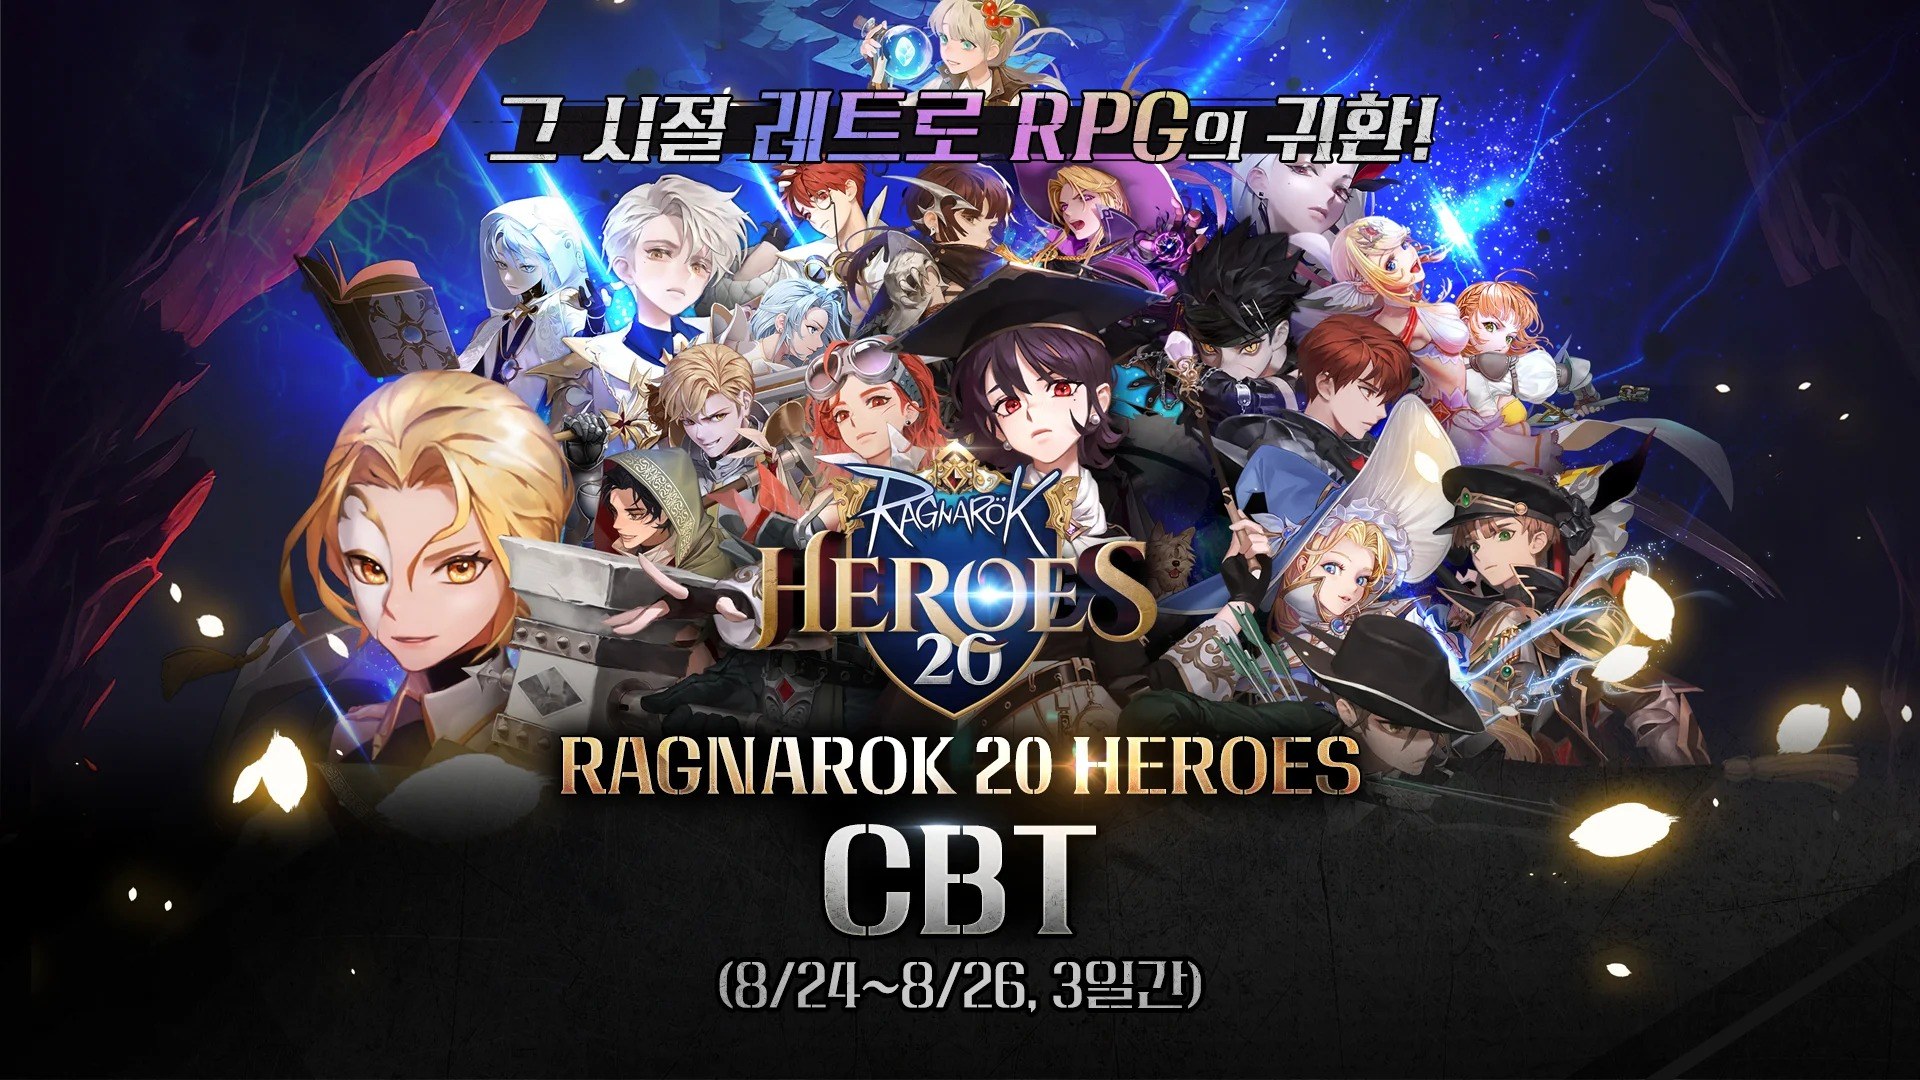 Ragnarok 20 Heroes is now available for Pre-Registrations for Android and iOS in South Korea